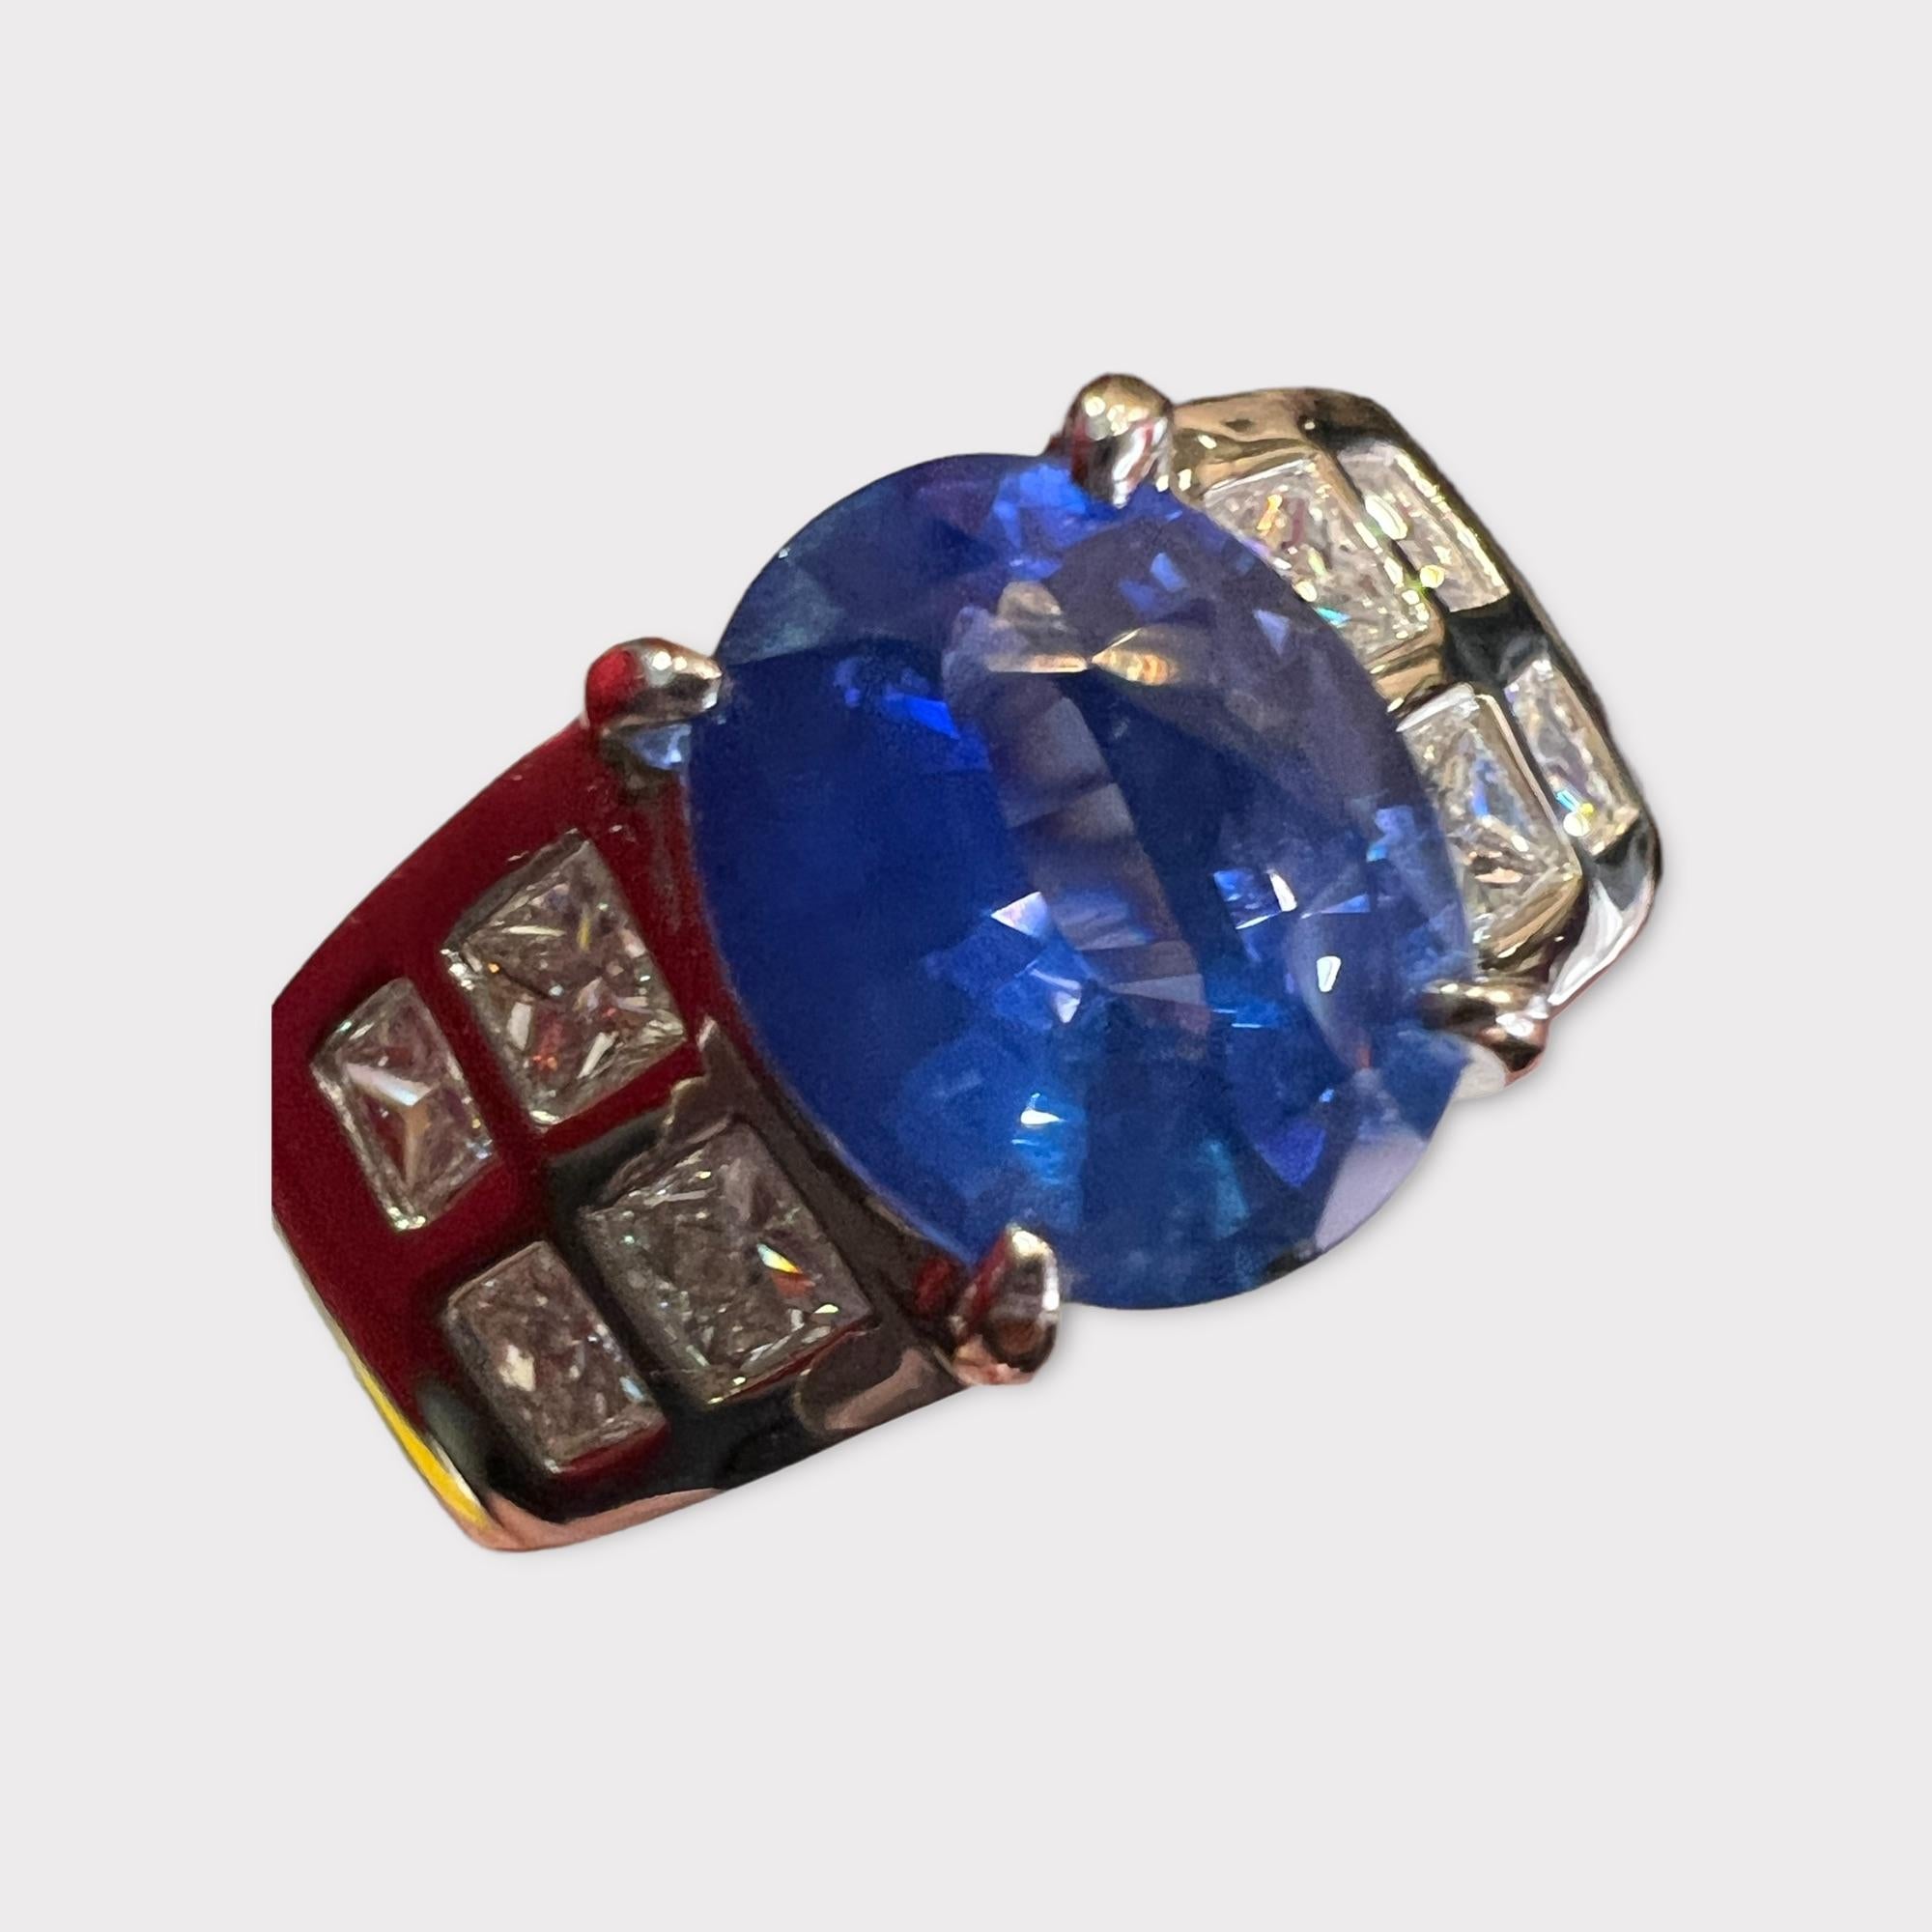 Magnificent blue sapphire of 3.23 Carat surrounded by 8 princess cut diamonds for 0.95 Carat in total, 18 carat gold cocktail ring.
total weight: 12.50 grams
size: 54.5 or 6 -3/4
dimension of the blue sapphire: 1cm / 0.70 cm